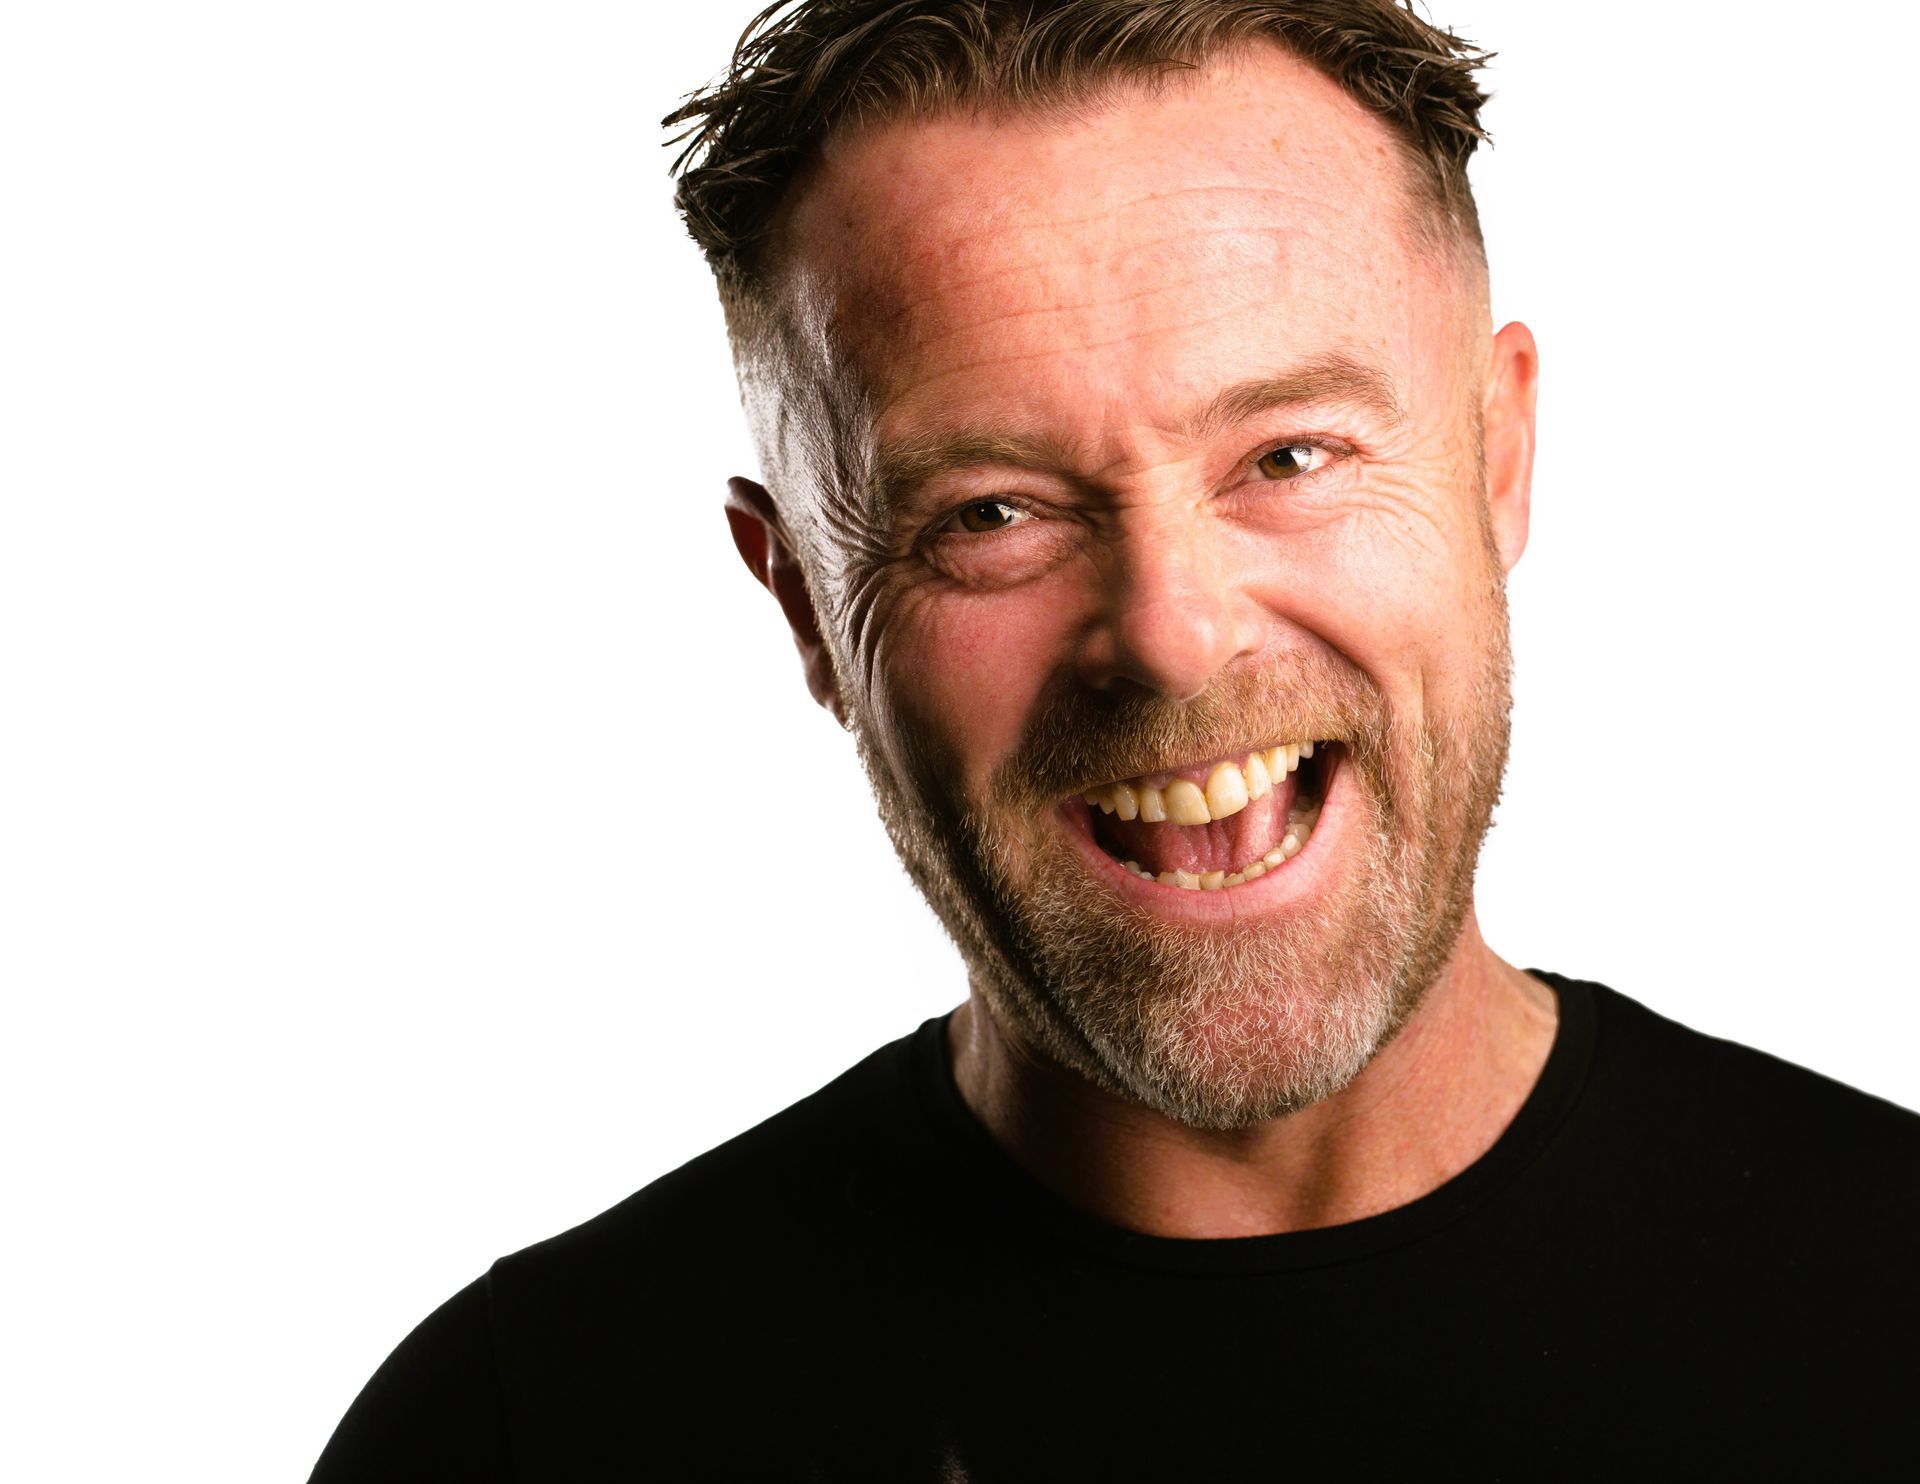 Eric Lalor
 Lol-er By Nature 
Liberty Hall, Dublin
19th September
Tickets on sale now from www.ticke